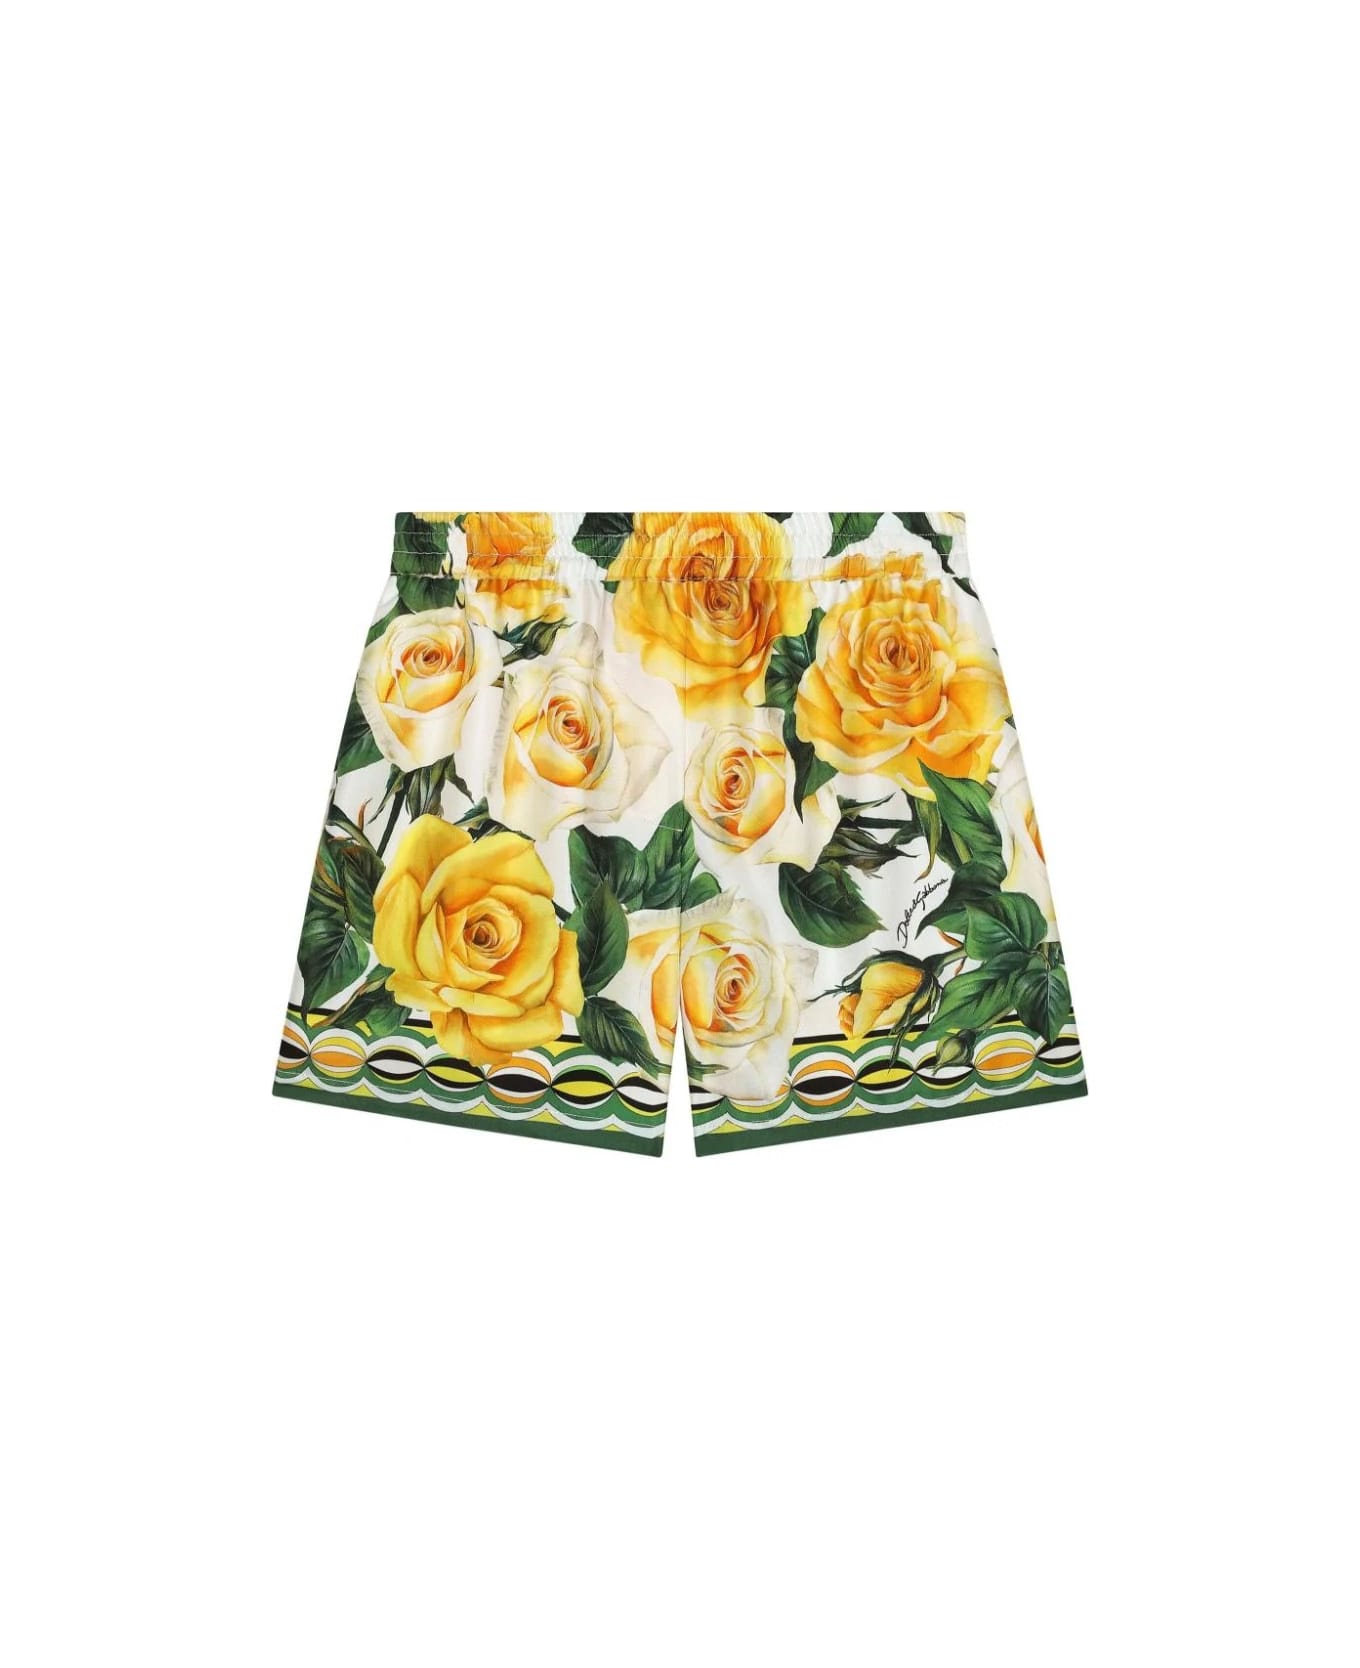 Dolce Small & Gabbana Twill Shorts With Yellow Rose Print - White